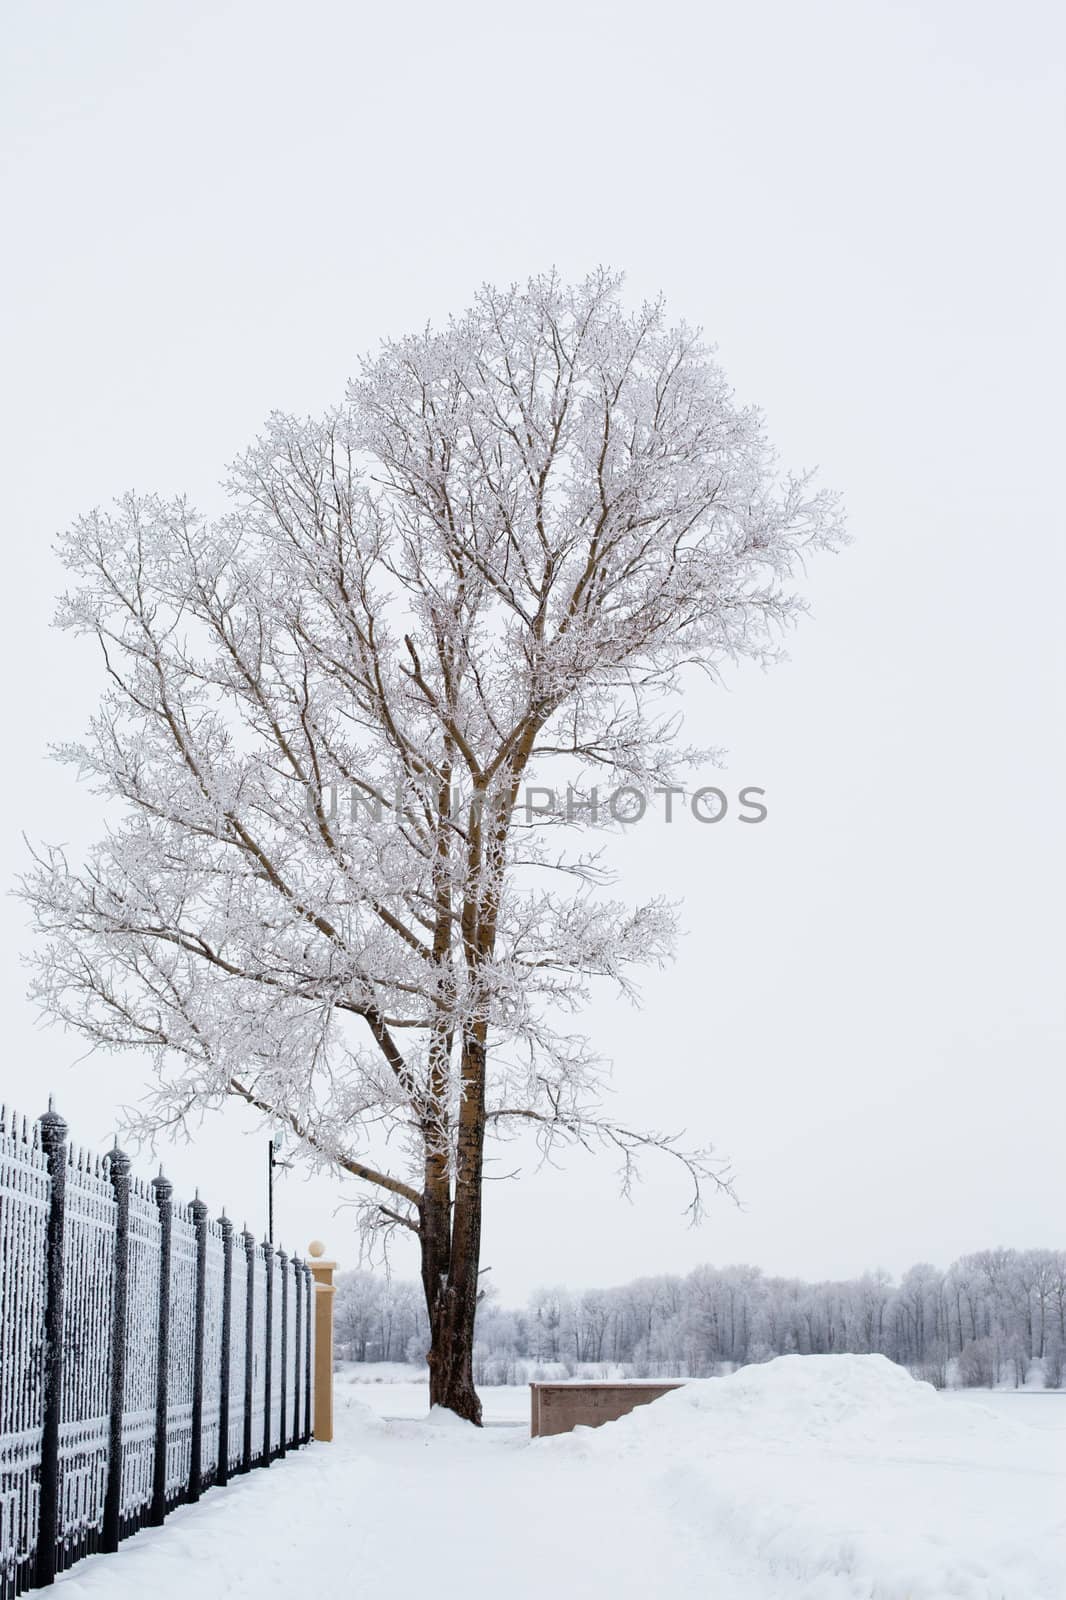 White tree and black fence in winter
